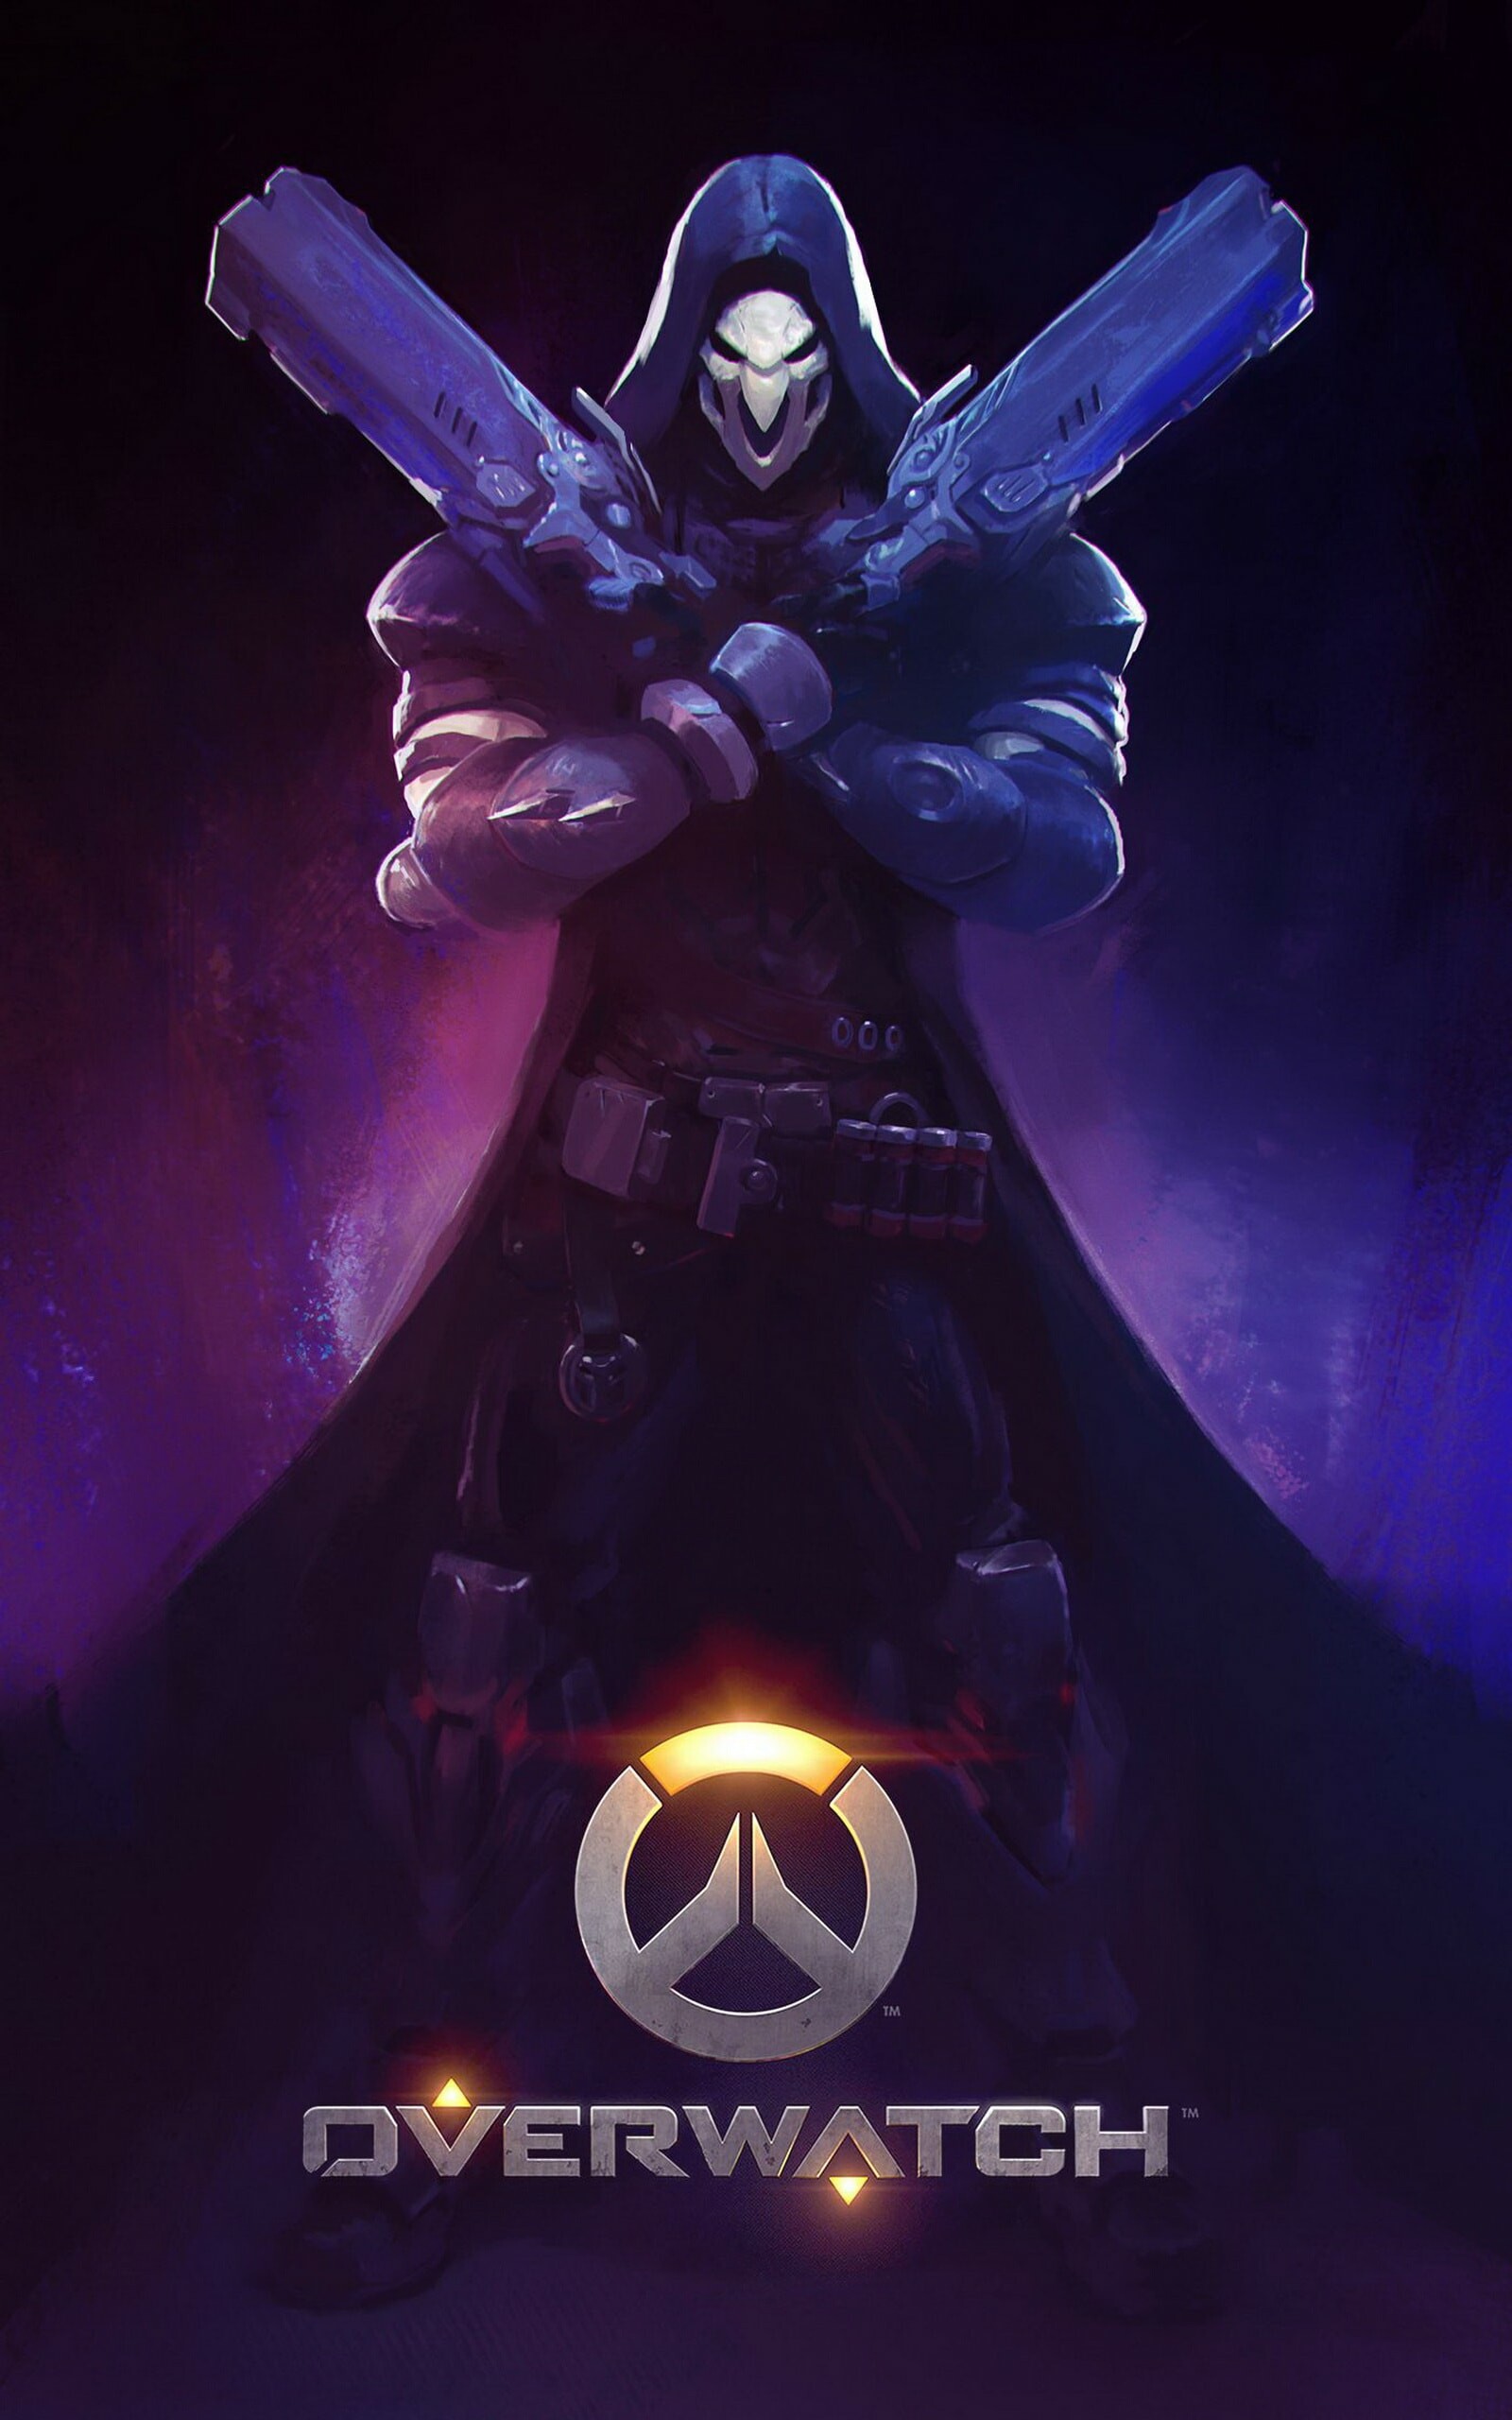 Overwatch: Reaper, Real name Gabriel Reyes, Multiplayer game. 1600x2560 HD Wallpaper.